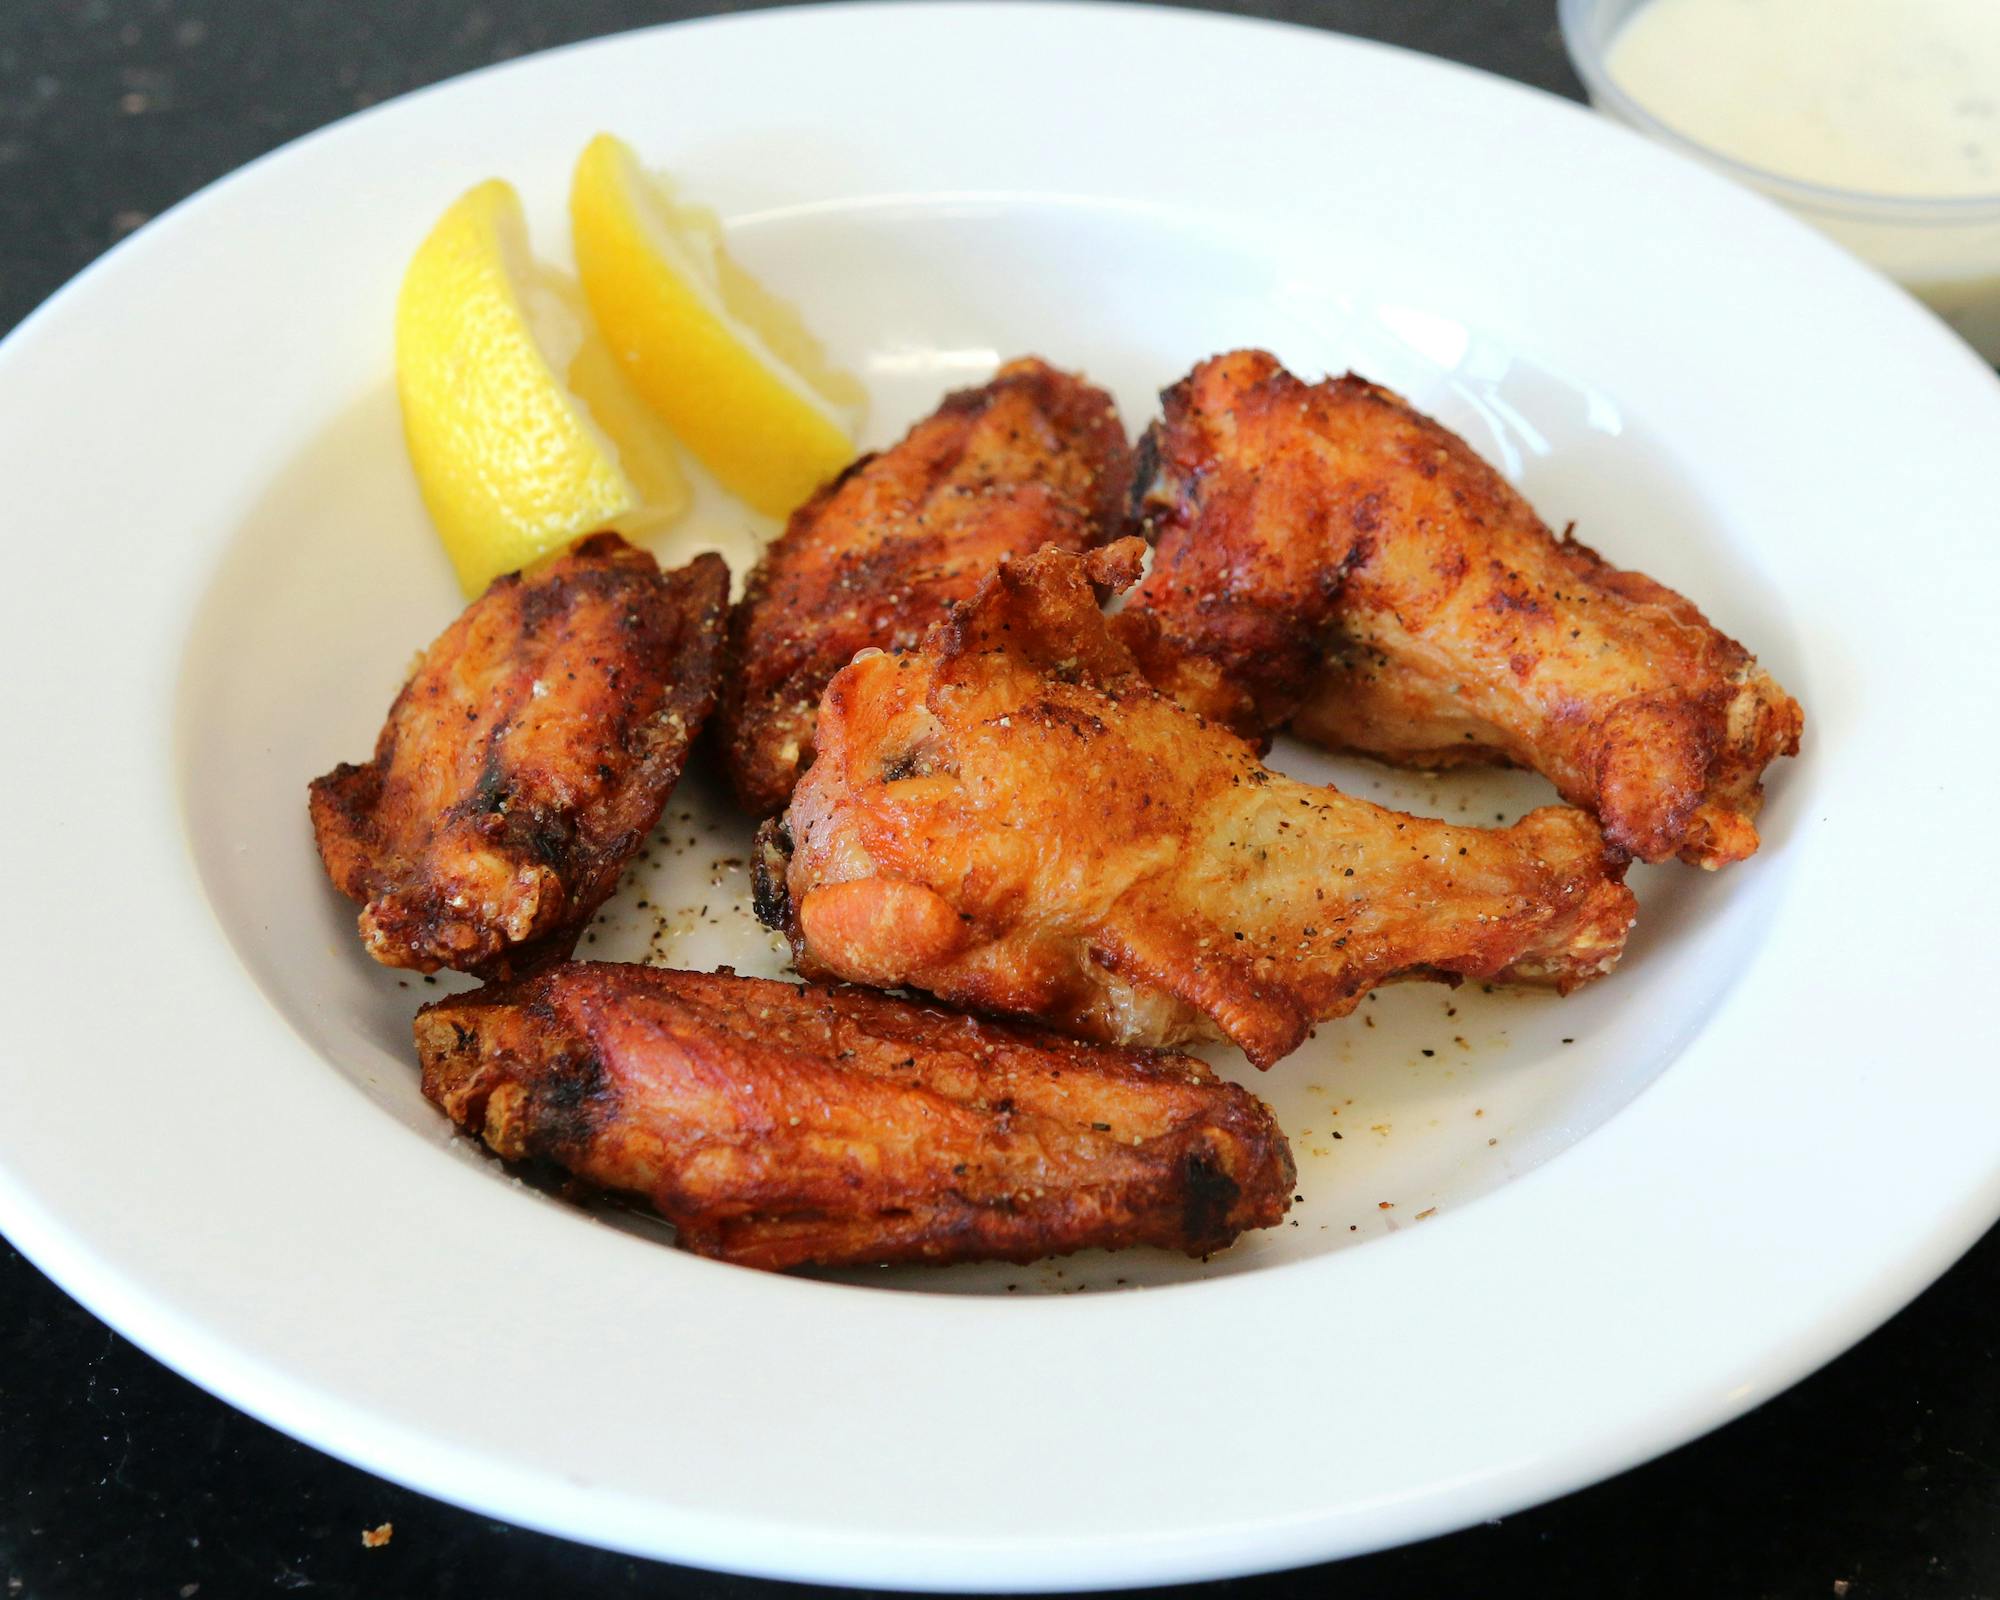 Lemon Pepper Wings from Aroma Pizza & Pasta in Lake Forest, CA